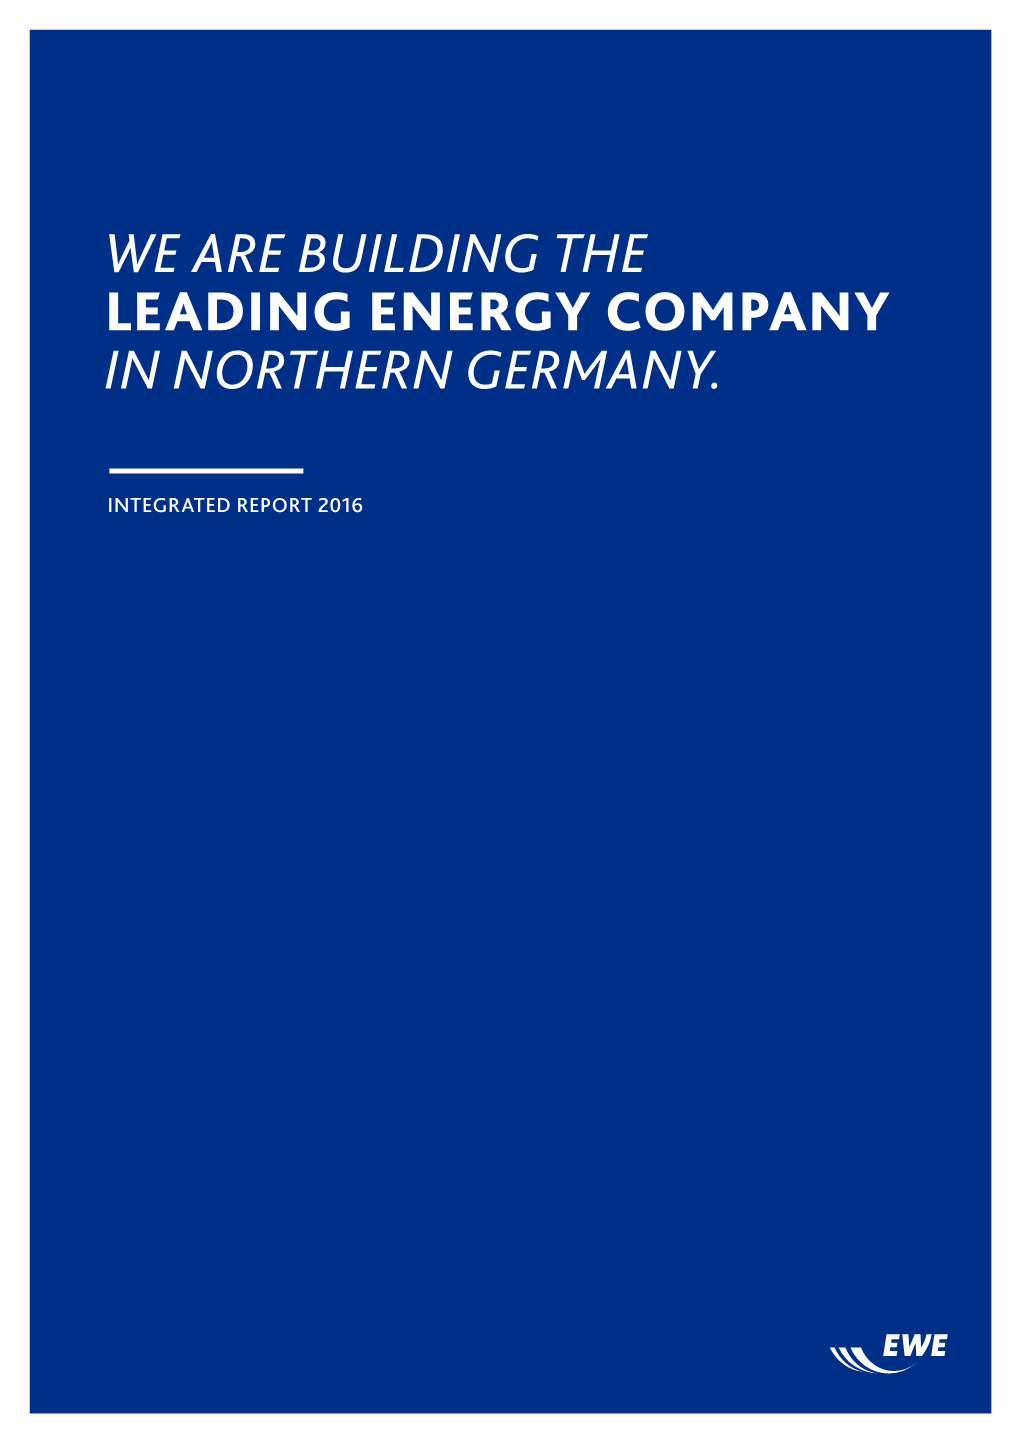 We Are Building the Leading Energy Company in Northern Germany